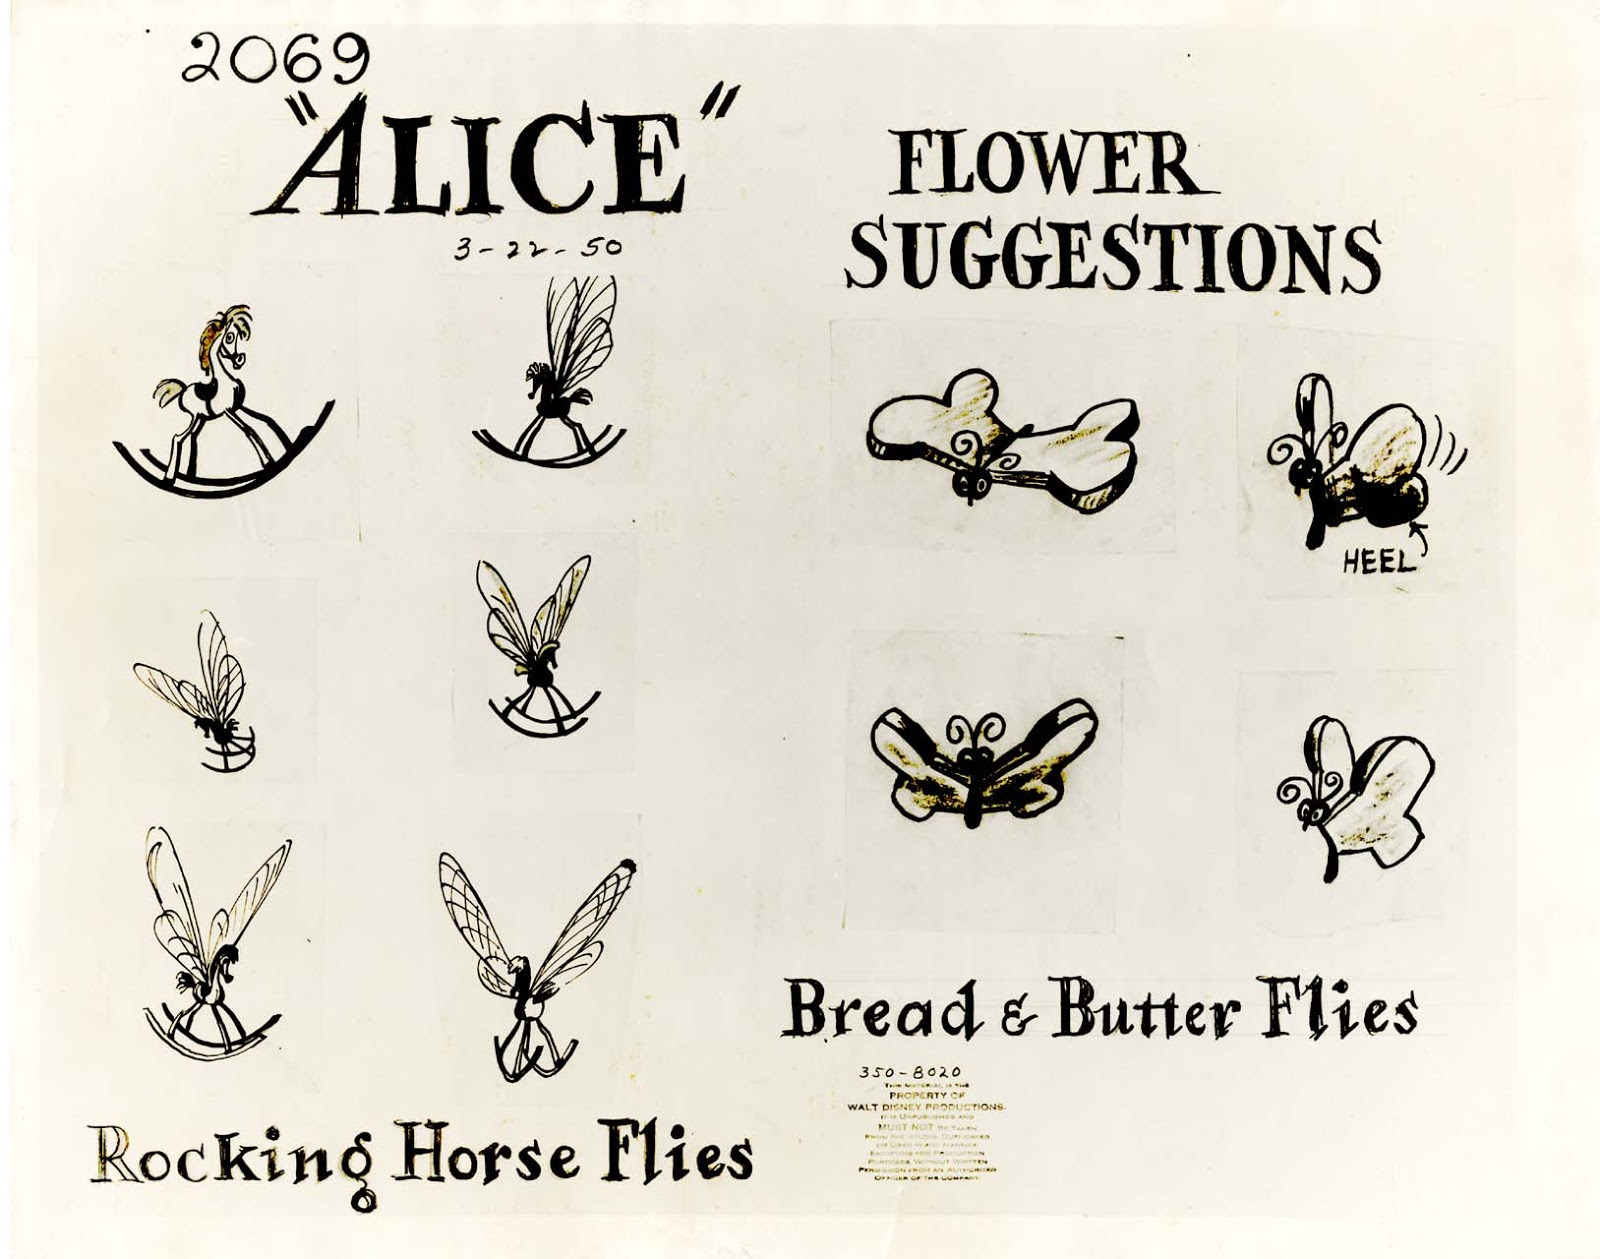 Vintage Disney Alice In Wonderland Animation Model Sheet 350 80 Flower Suggestions For Rocking Horse Flies And Bread Butter Flies